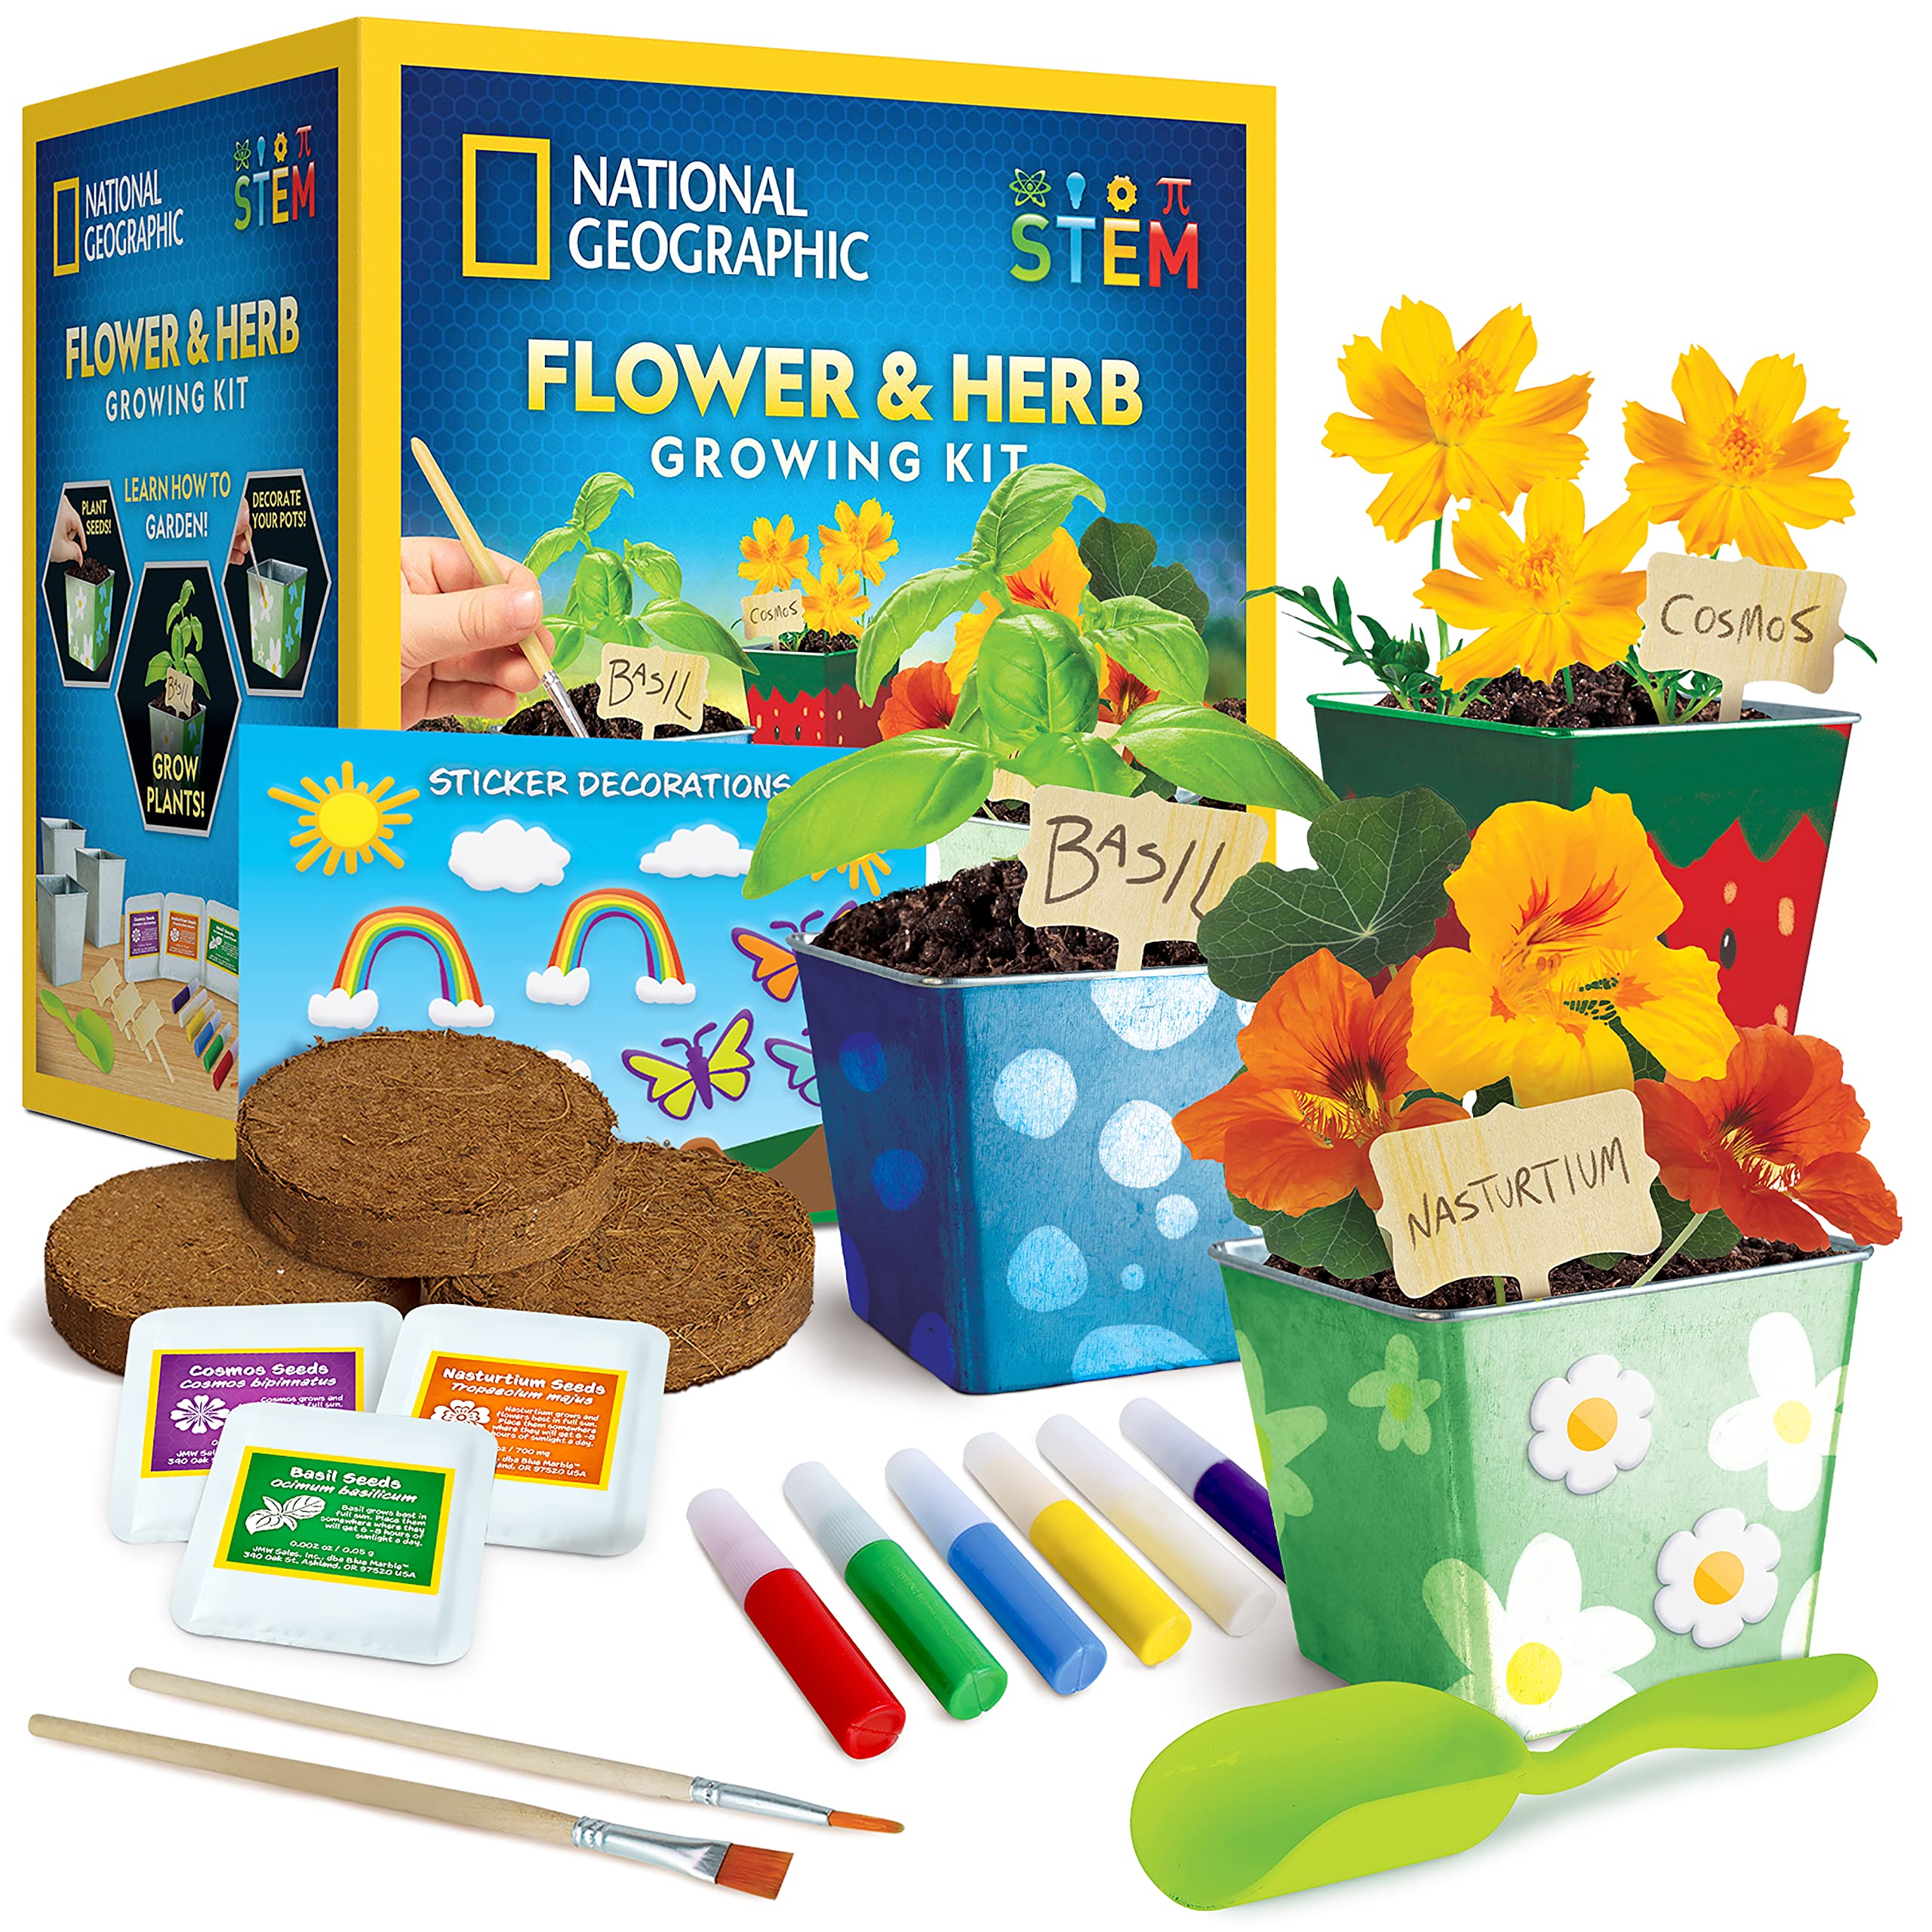 NATIONAL GEOGRAPHIC Flower & Herb Gardening Kit for Kids - Kids Gardening Set with 3 Stainless Steel Pots, Paint & Stickers, Outdoor Toys, Craft Kits, Kids Plant Growing Kit (Amazon Exclusive)